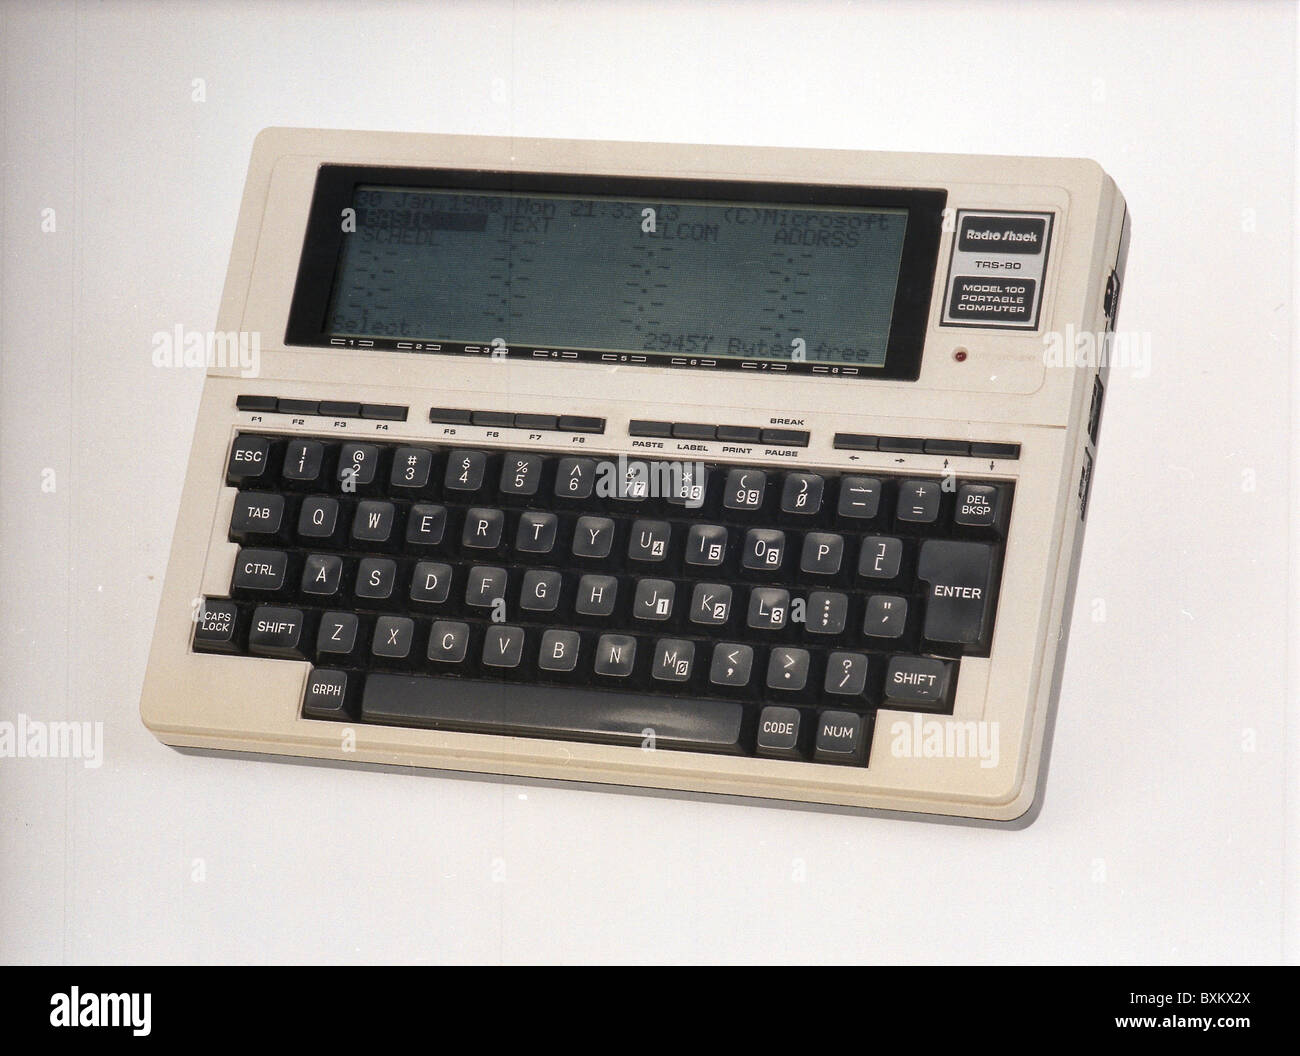 computing / electronics, portable computer, Tandy Radio Shack, TRS 80 type 100, early notebook, USA, 1983, processor 80C85 with 2,4 MHz, Microsoft operating system, with integrated Basic, implemented software: Word, timeplaner, database, 8 KB RAM (max. 32 KB), LCD, display, monochrom, original price 1983: Dollar 799, technic, technics, invention, historic, historical, 1980s, 80s, 20th century, historic, historical, computers, Additional-Rights-Clearences-Not Available Stock Photo